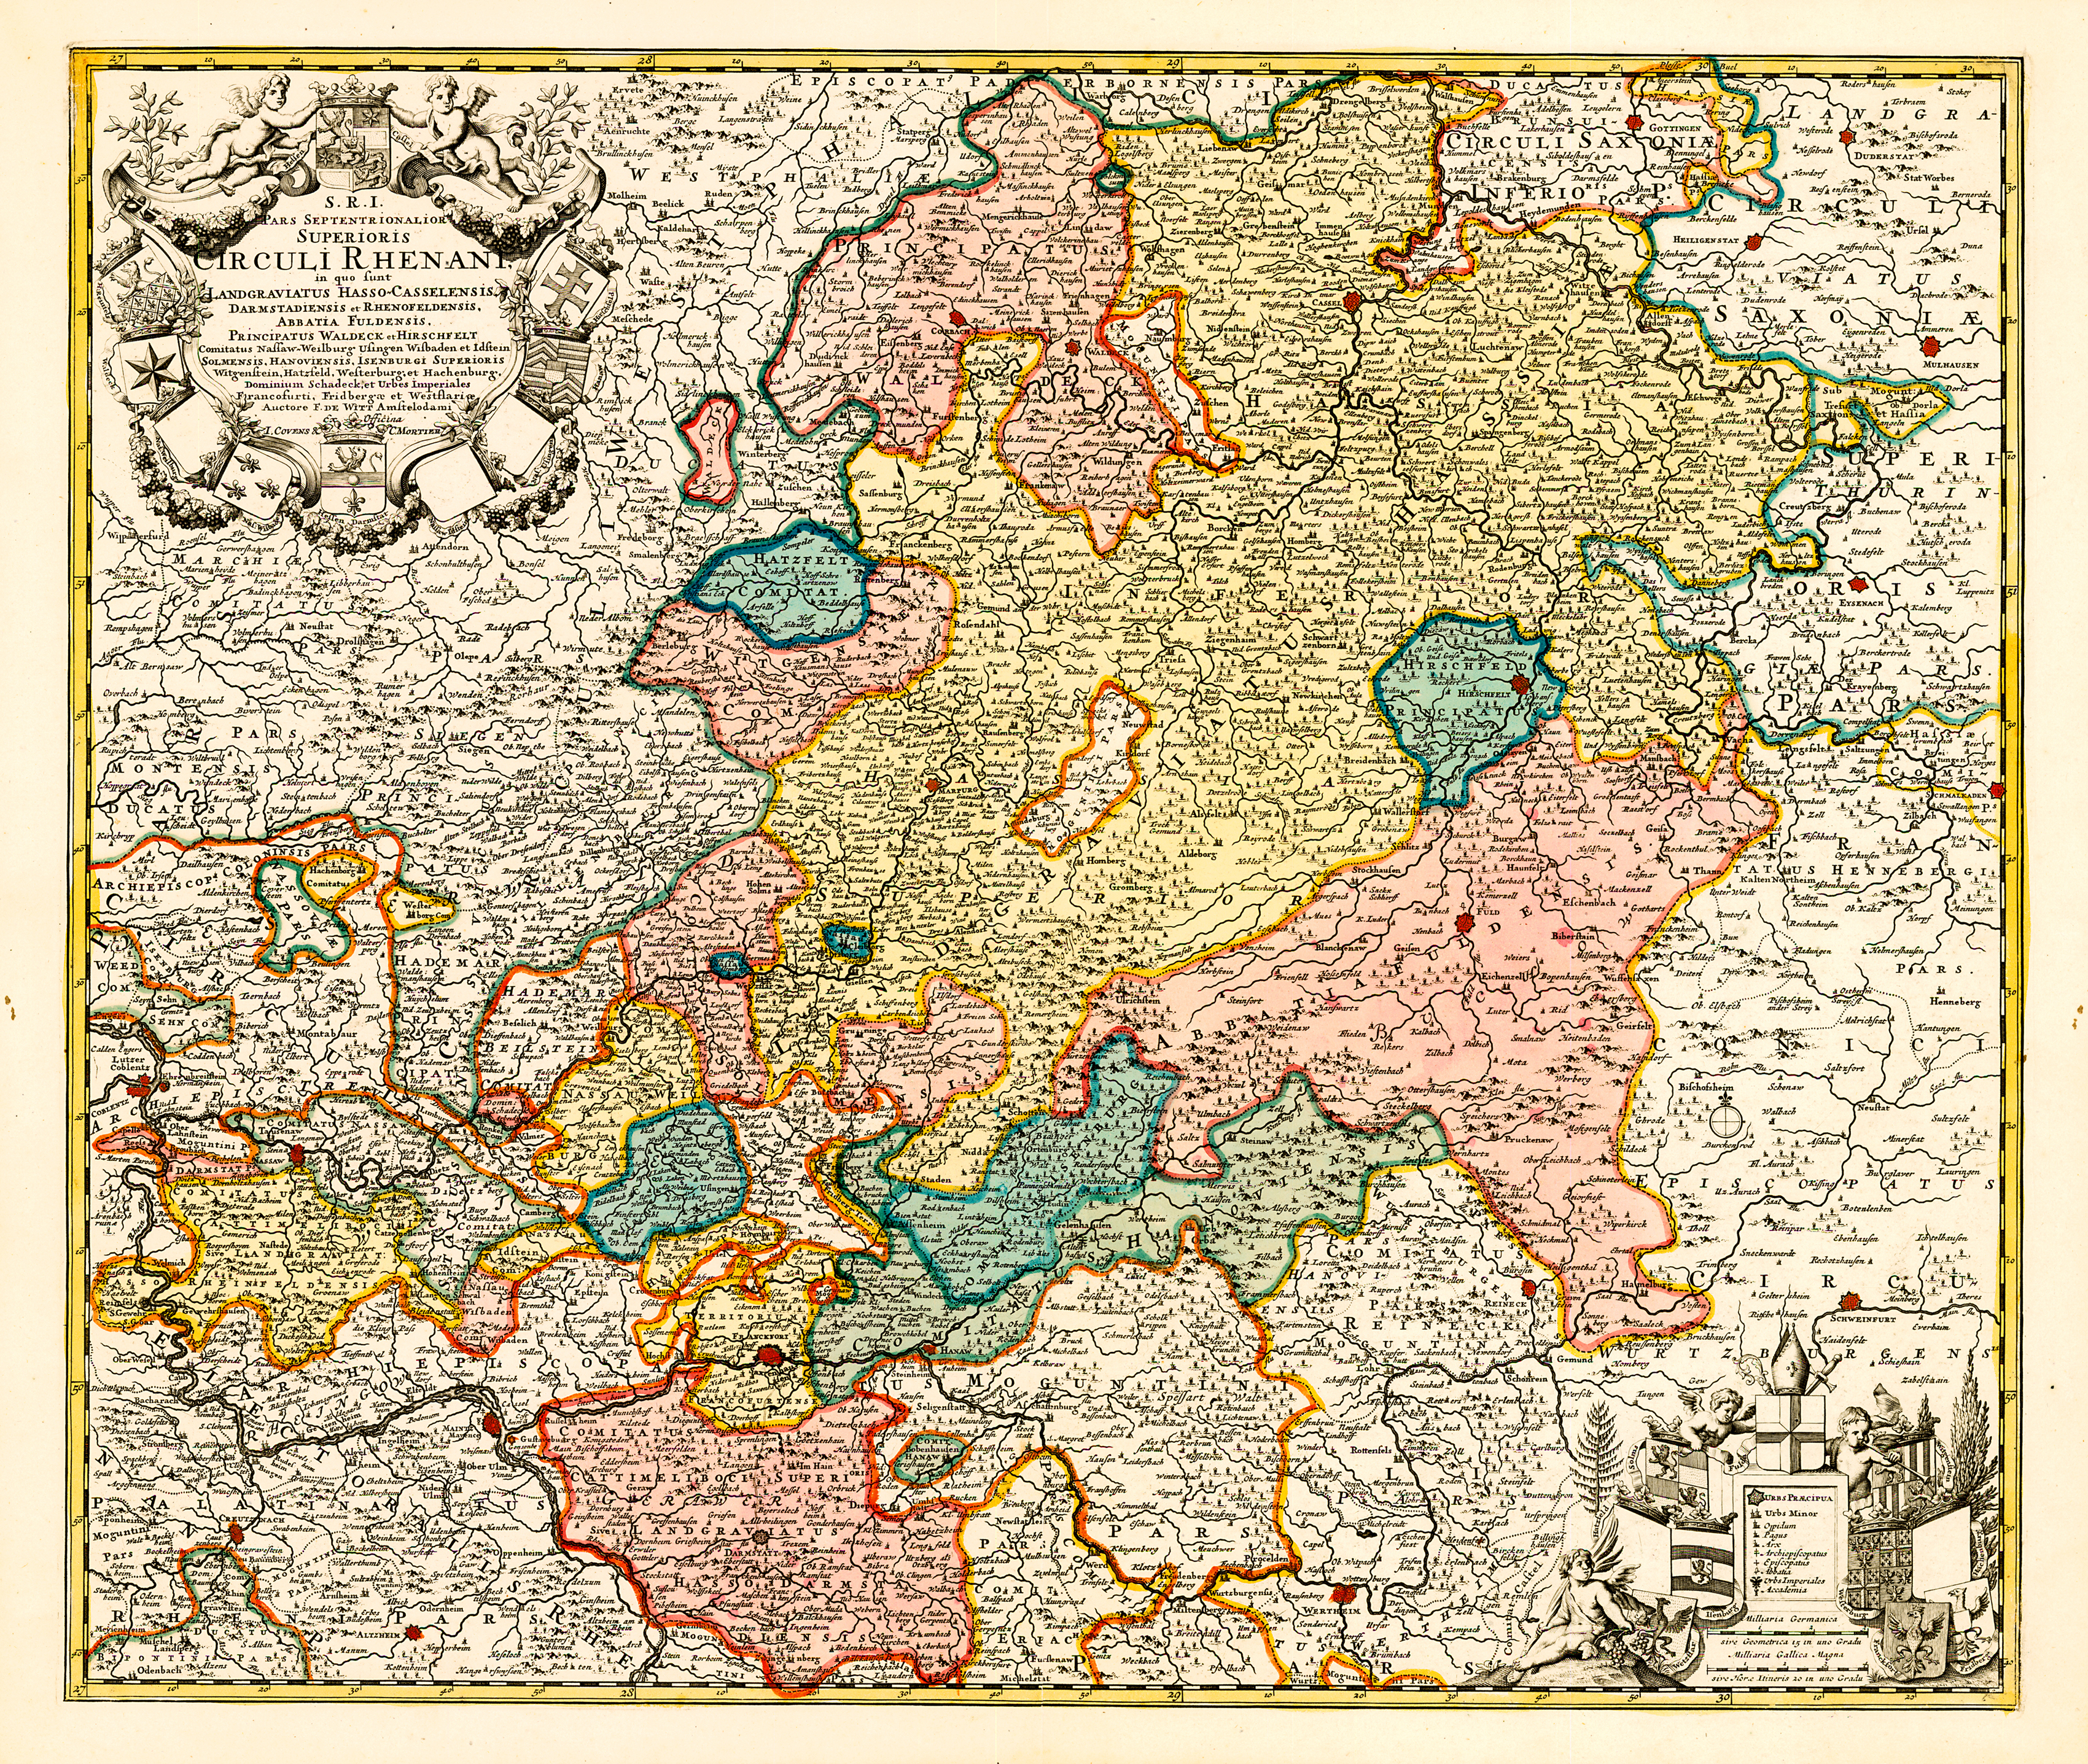 Map of the central German states in the 1760s. Source: Steve Schreiber.